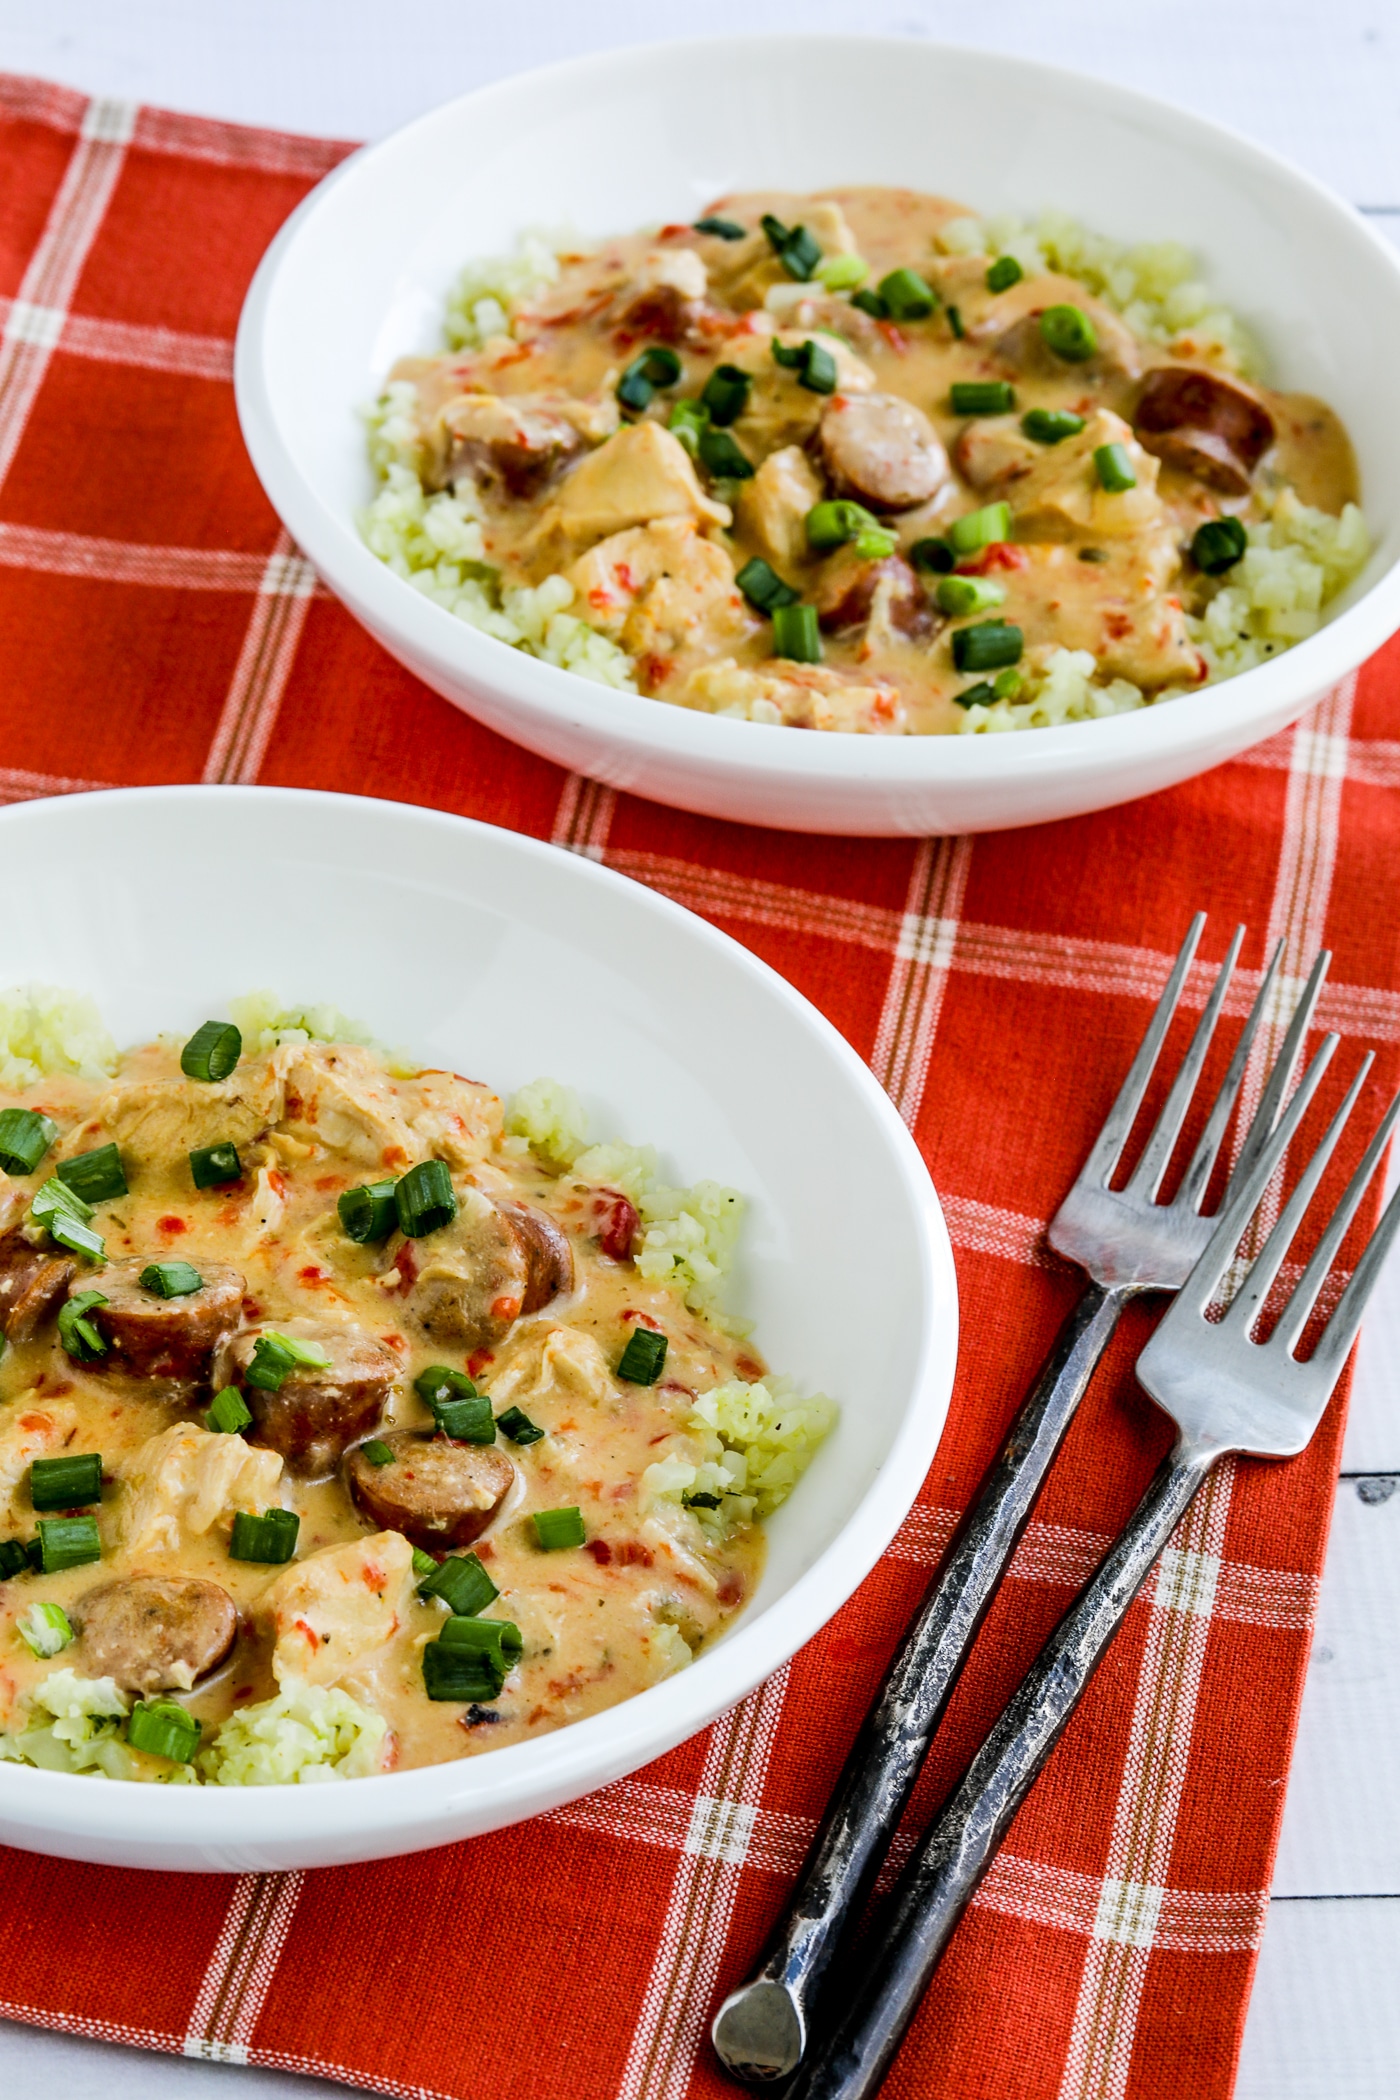 Chicken and sausage broth is offered in two serving plates and served with cauliflower rice